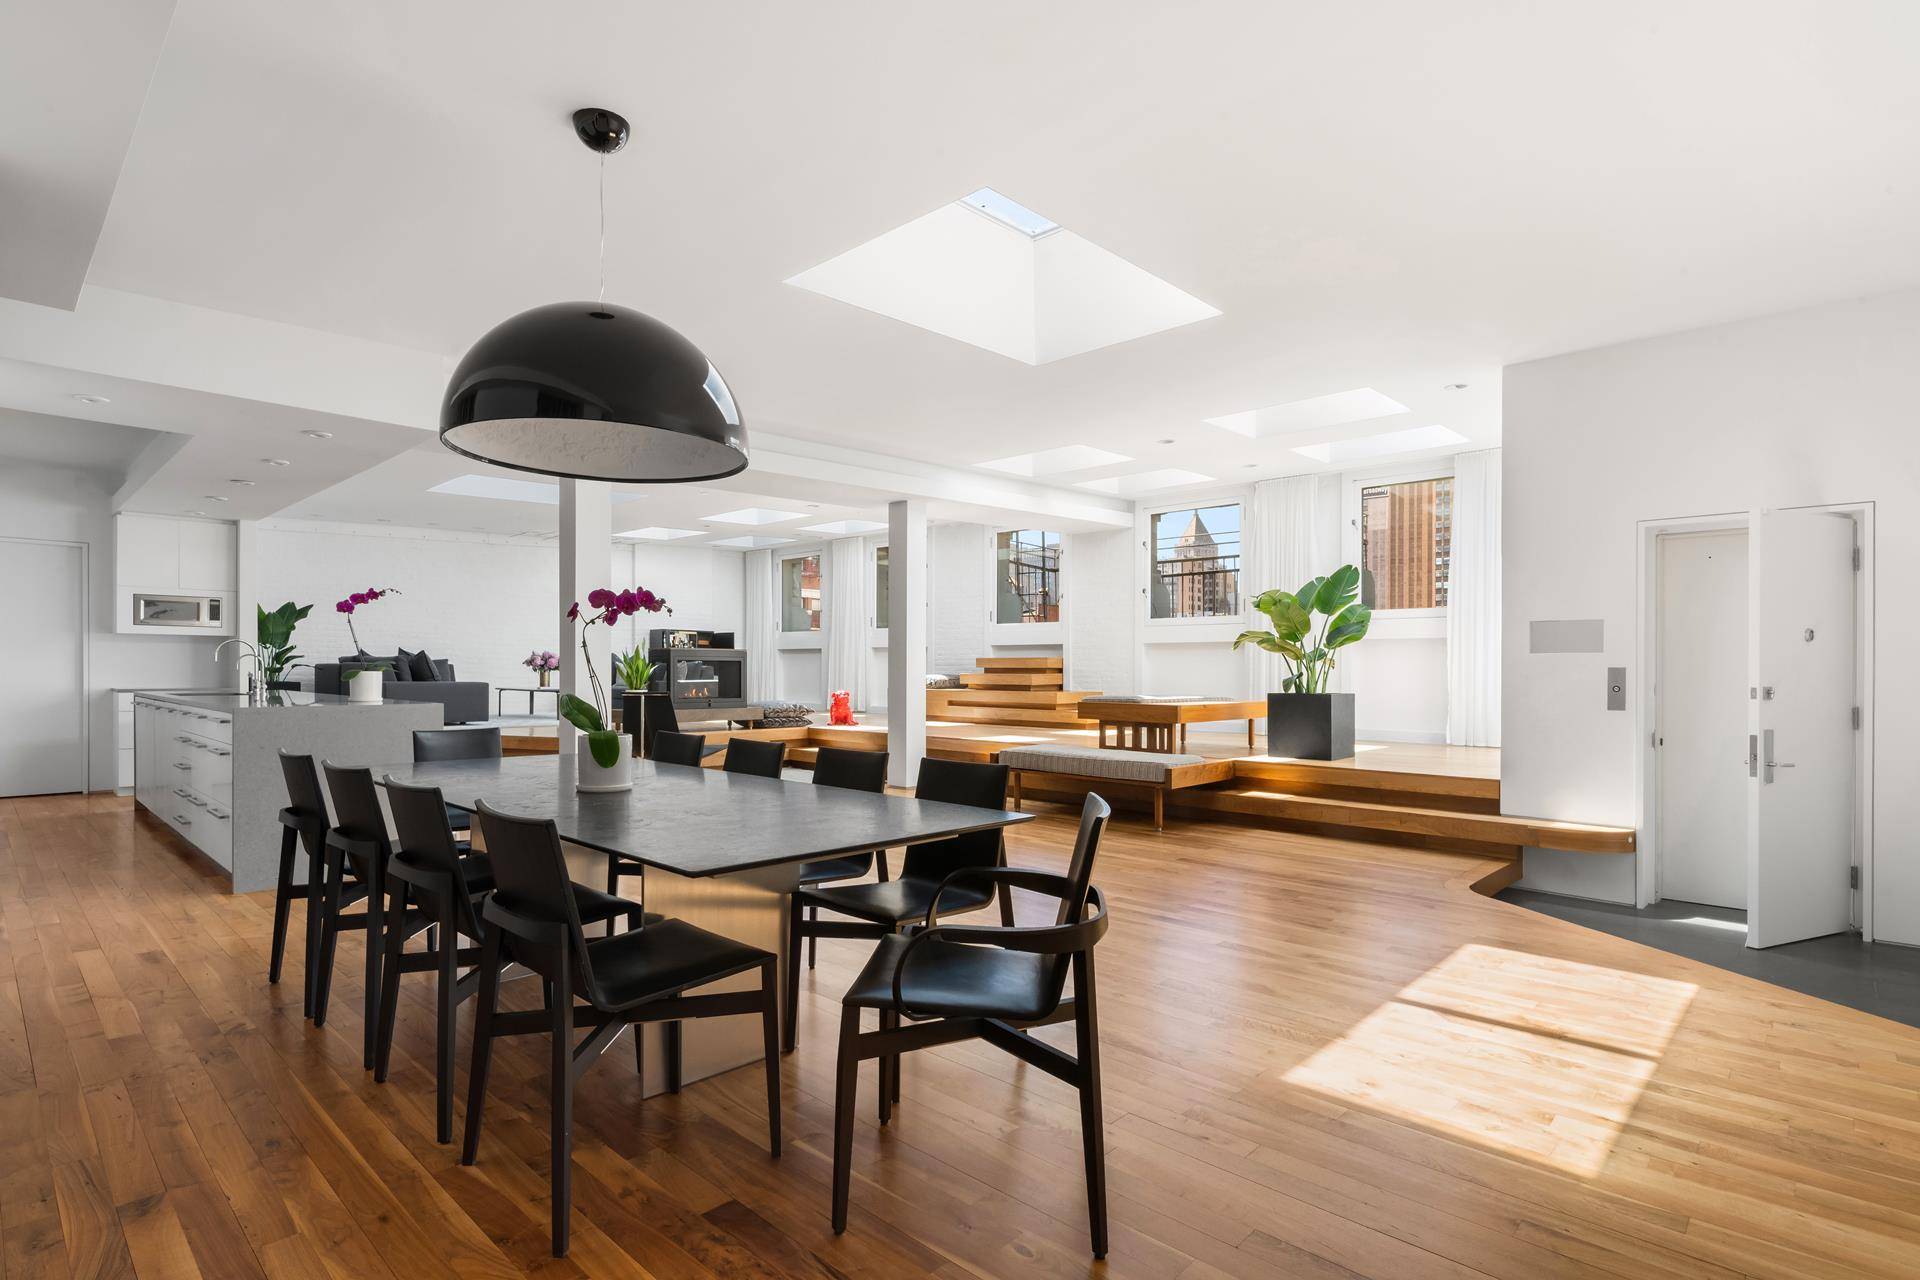 Introducing the exquisite full floor penthouse with sprawling private roof terrace at 96 Grand Street, a boutique 9 unit coop situated in the heart of Soho.